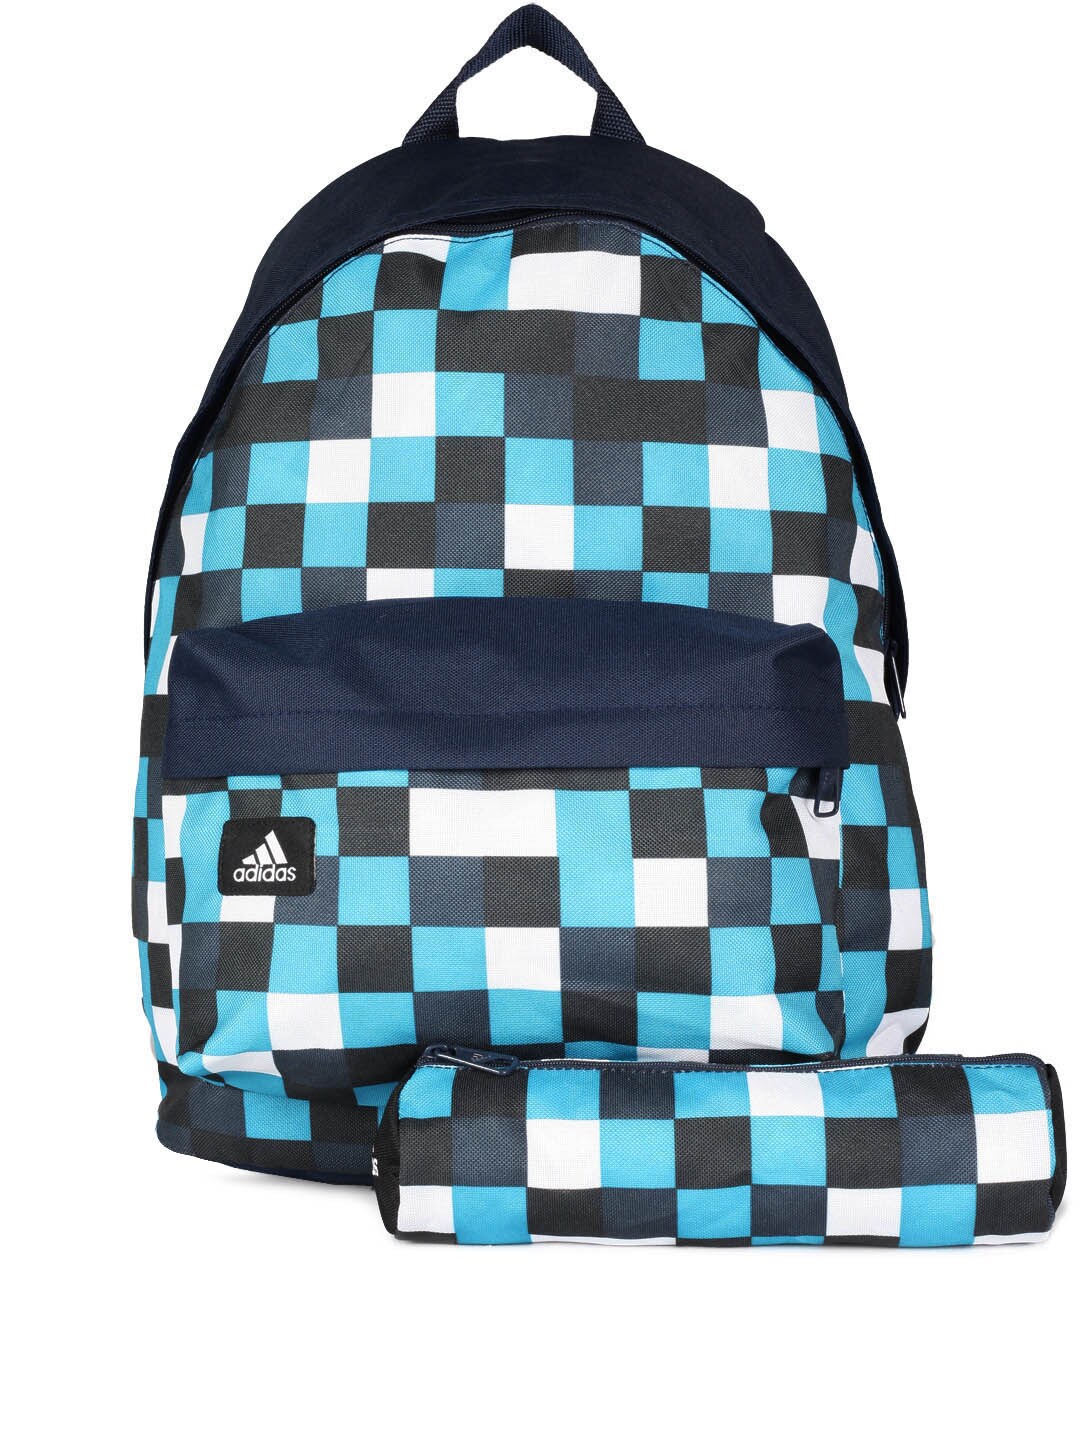 ADIDAS Unisex Navy Blue Checked Backpack